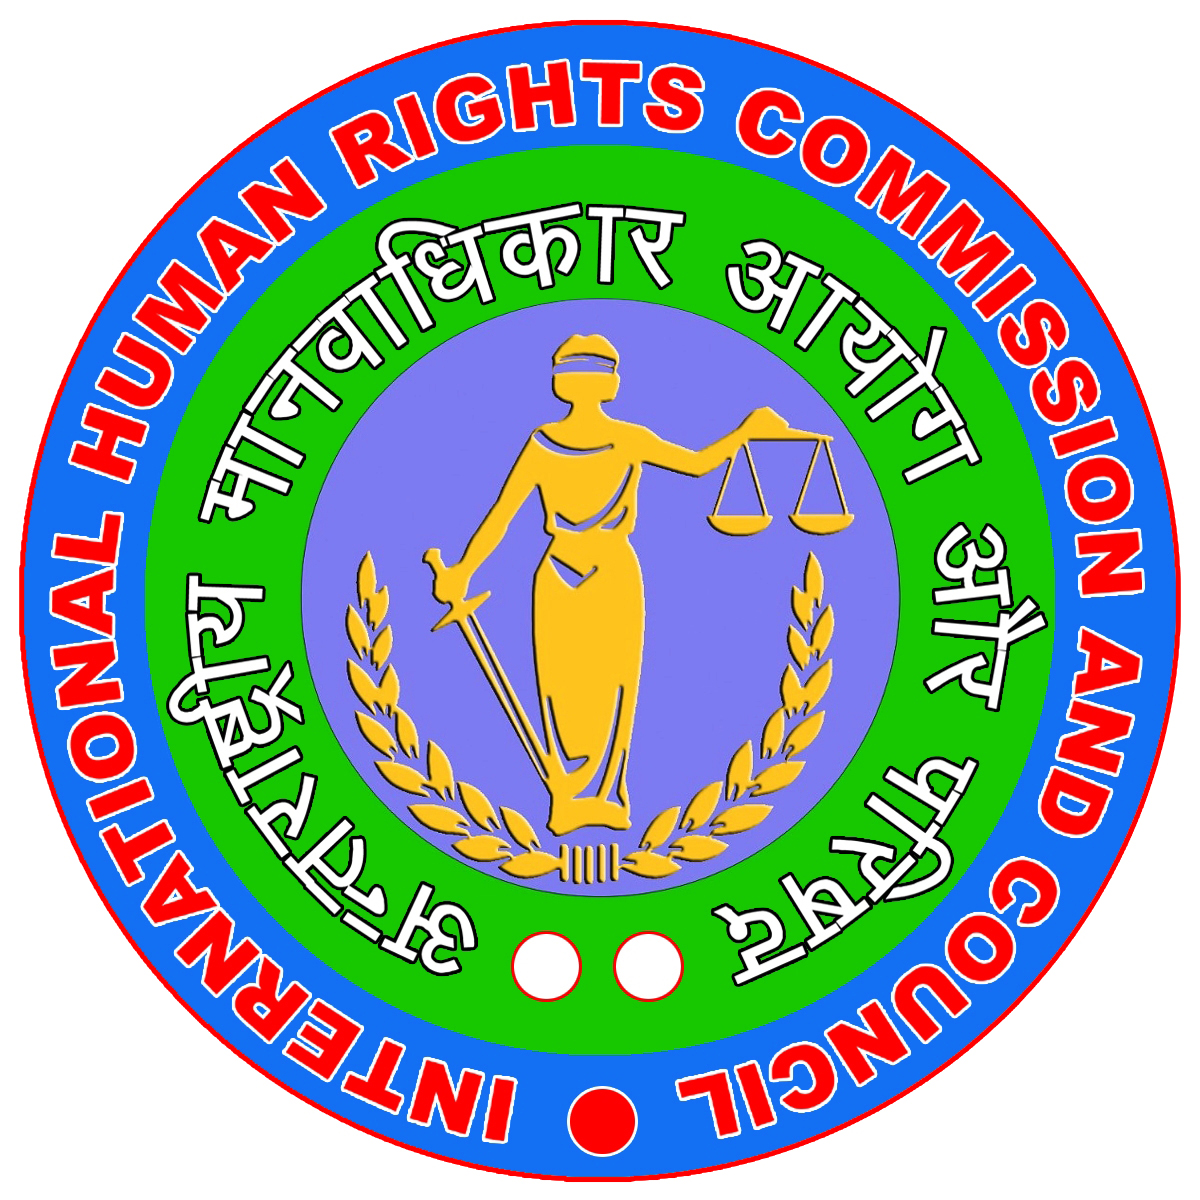 INTERNATIONAL HUMAN RIGHTS COMMISSION AND COUNCIL